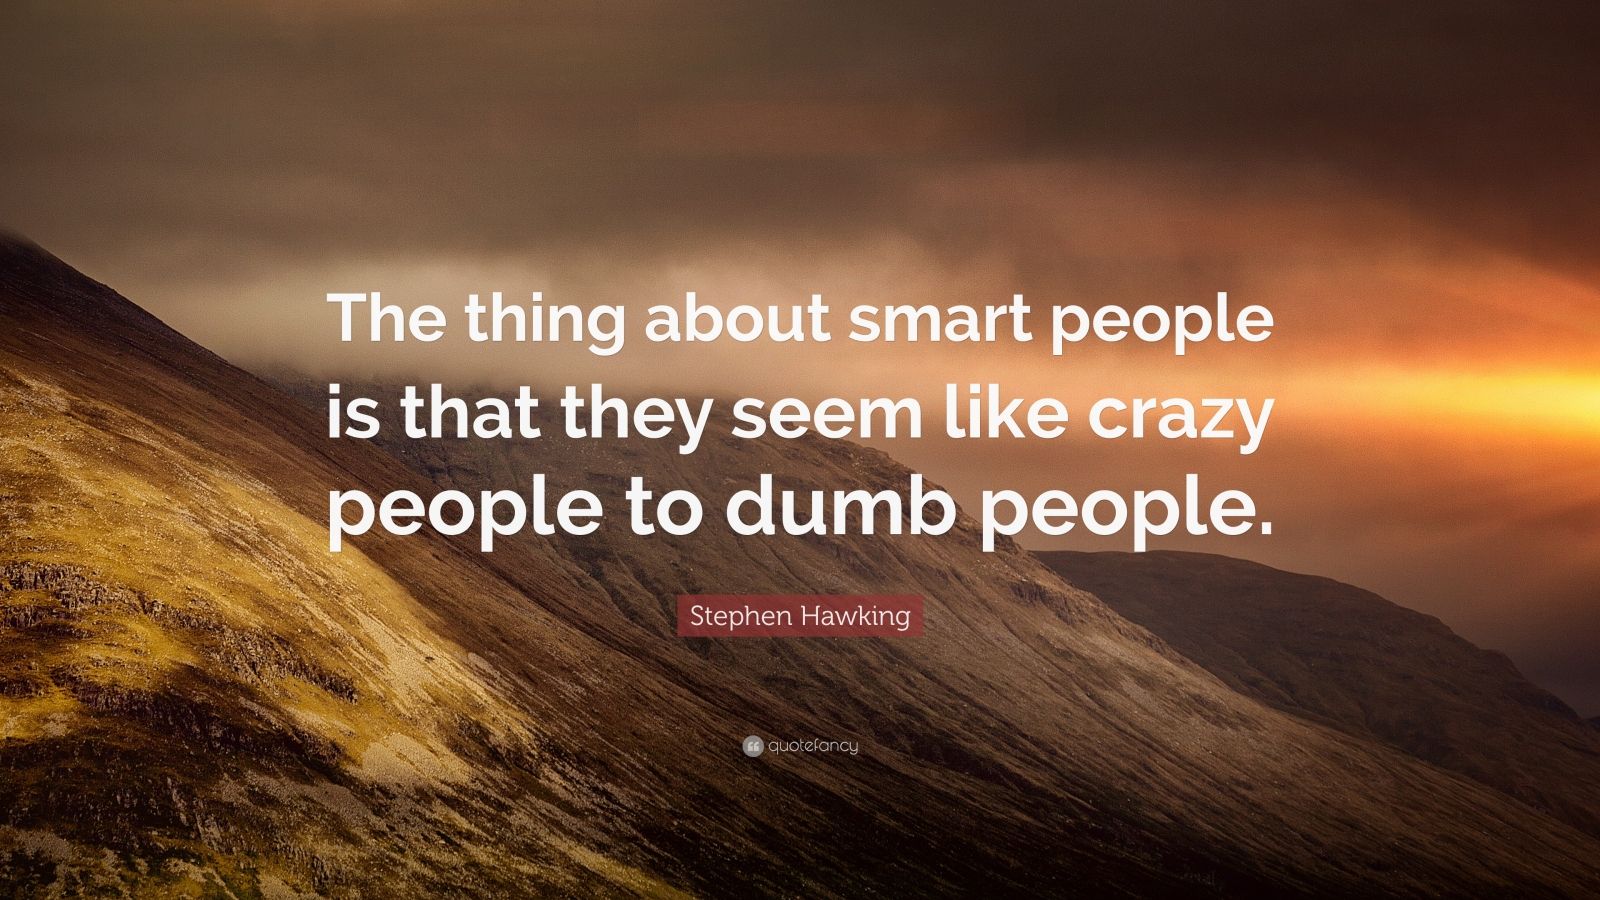 Stephen Hawking Quote: “The thing about smart people is that they seem